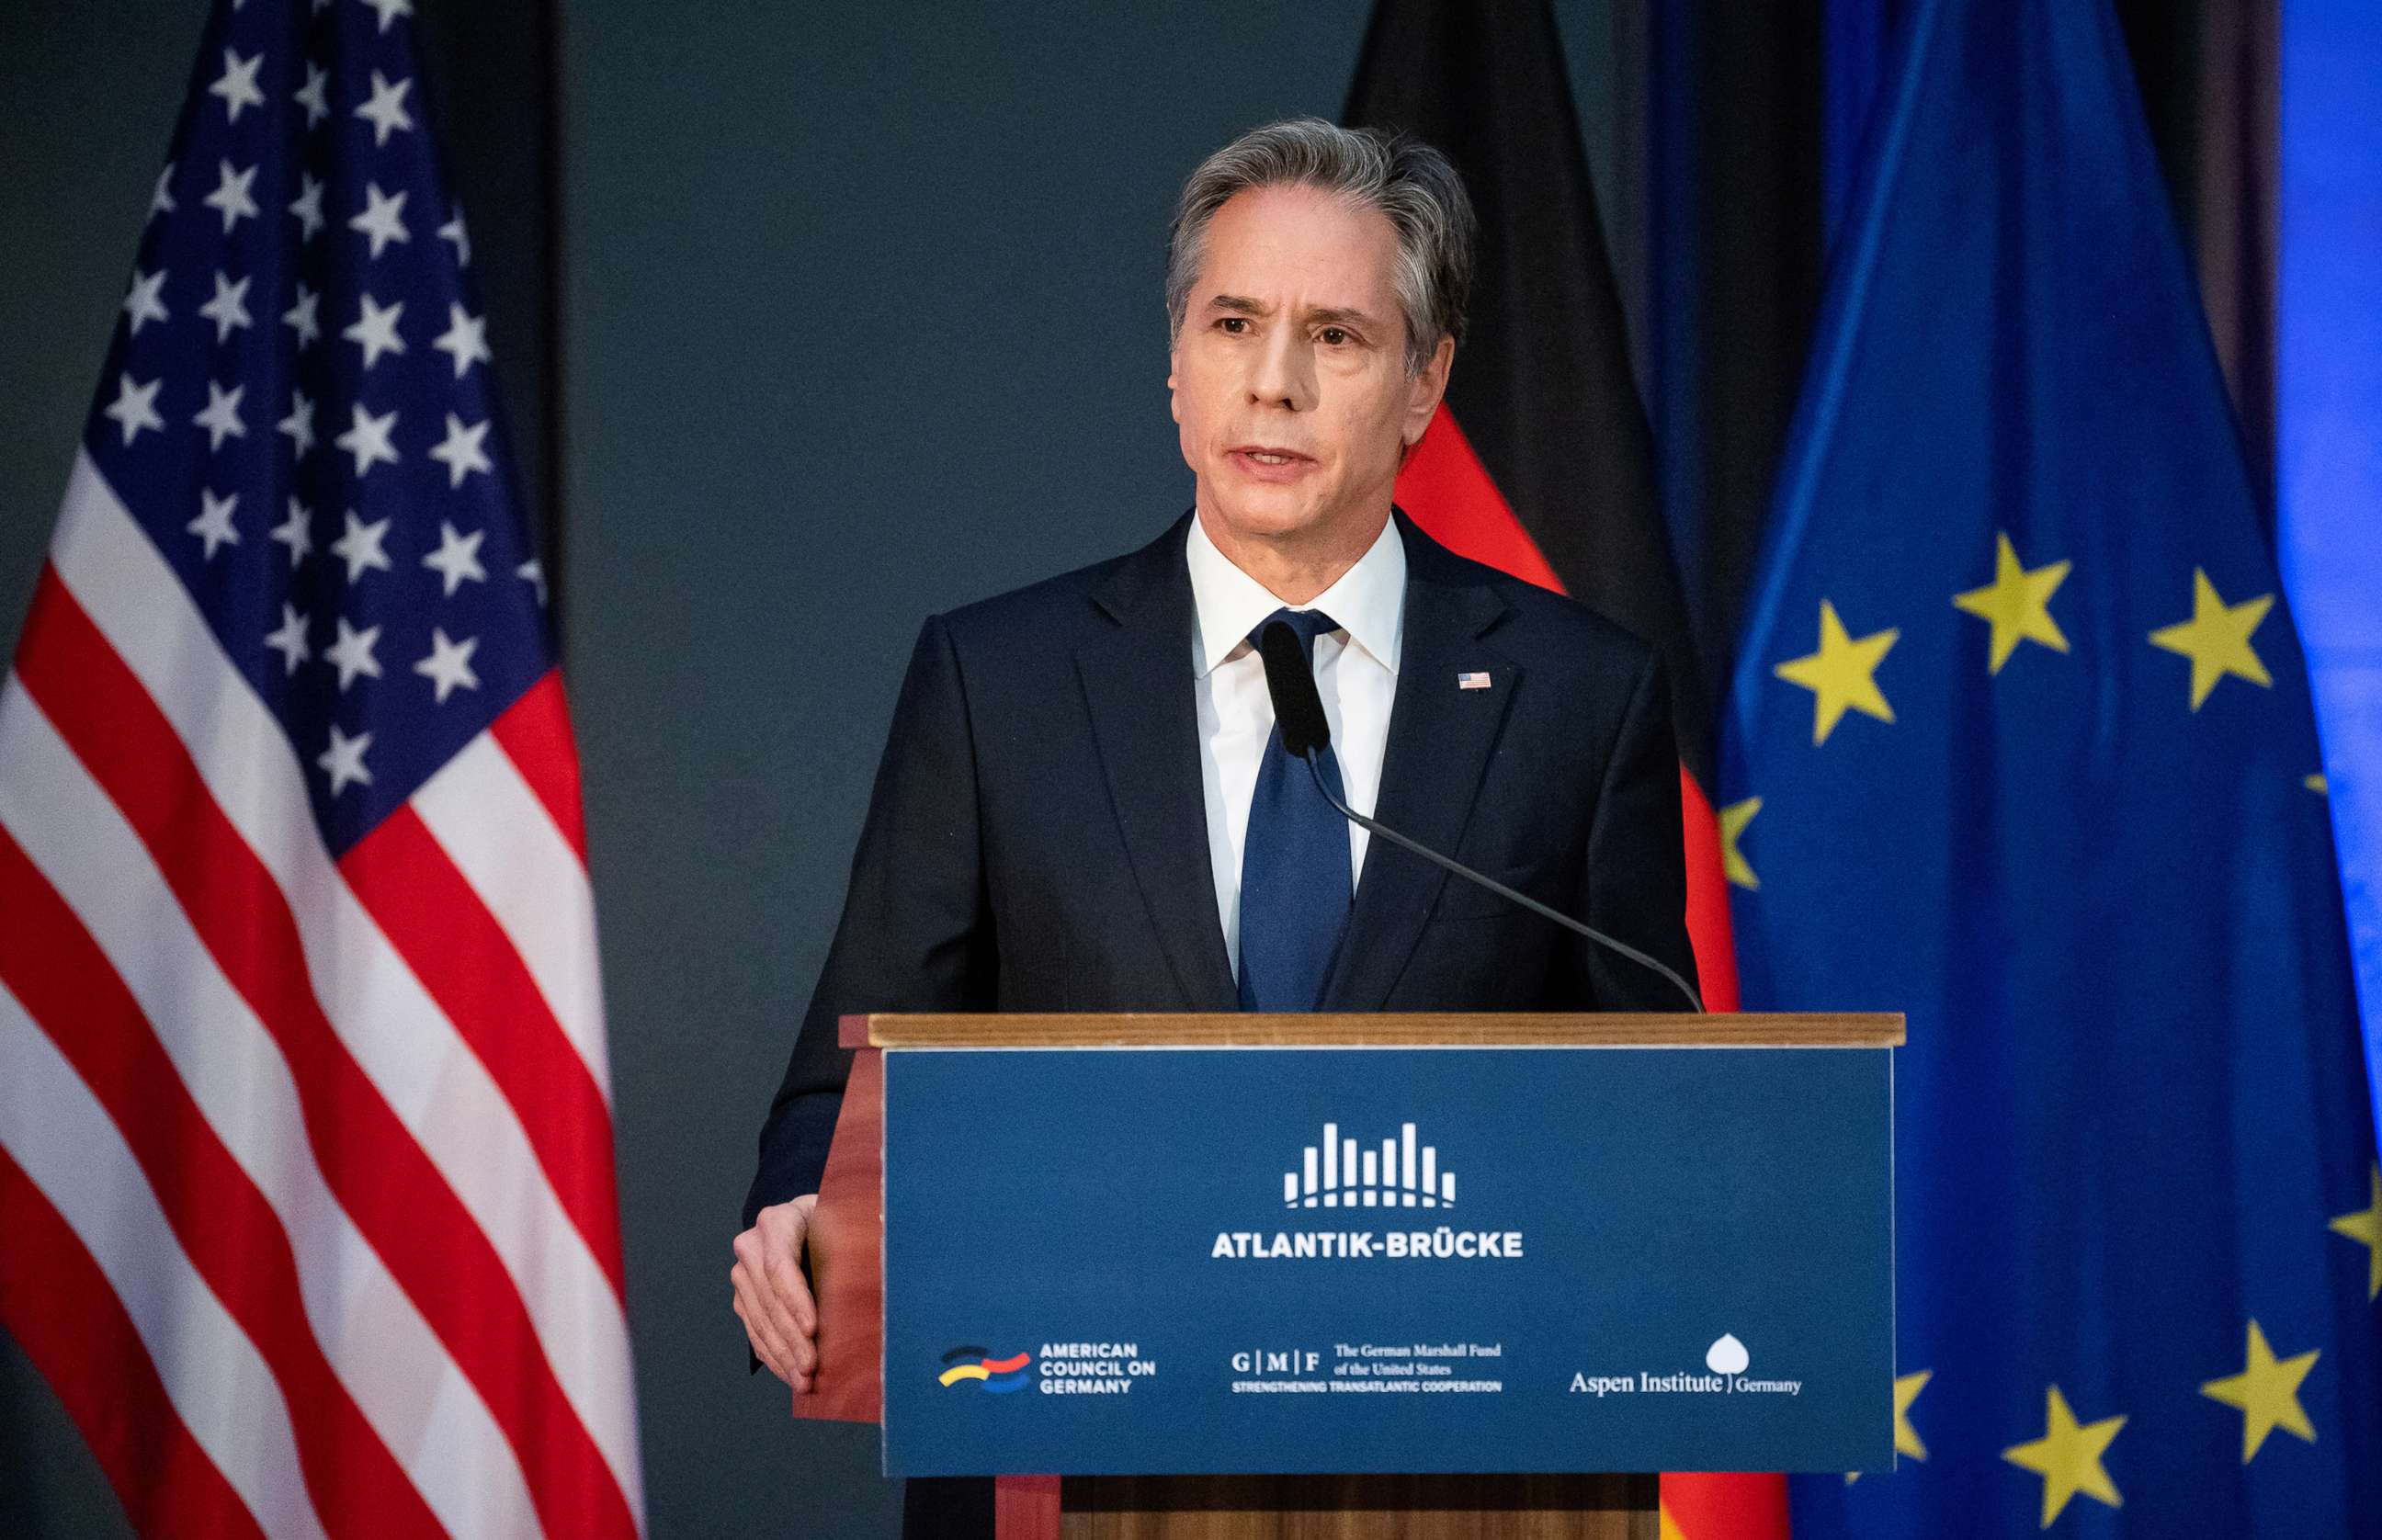 PHOTO: U.S. Secretary of State Antony Blinken speaks at a joint meeting of the Marshall Fund, the American Council on Germany, the Atlantic Bridge and the Aspen Institute following his talks on the Ukraine crisis in Berlin, Jan. 20, 2022.